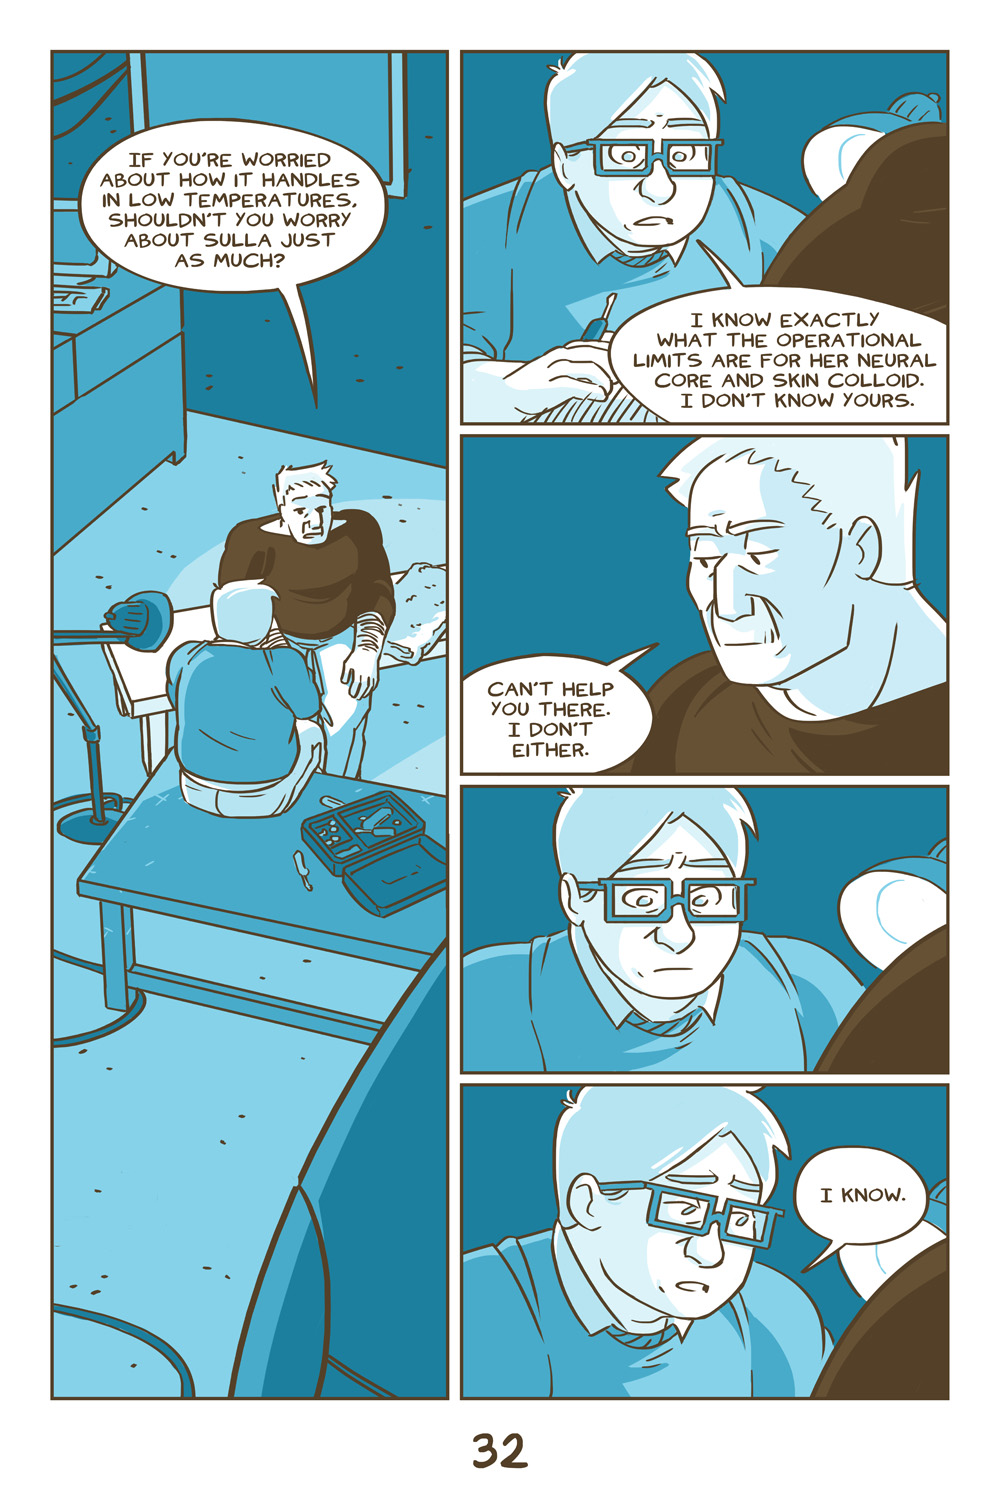 Chapter 7, Page 32